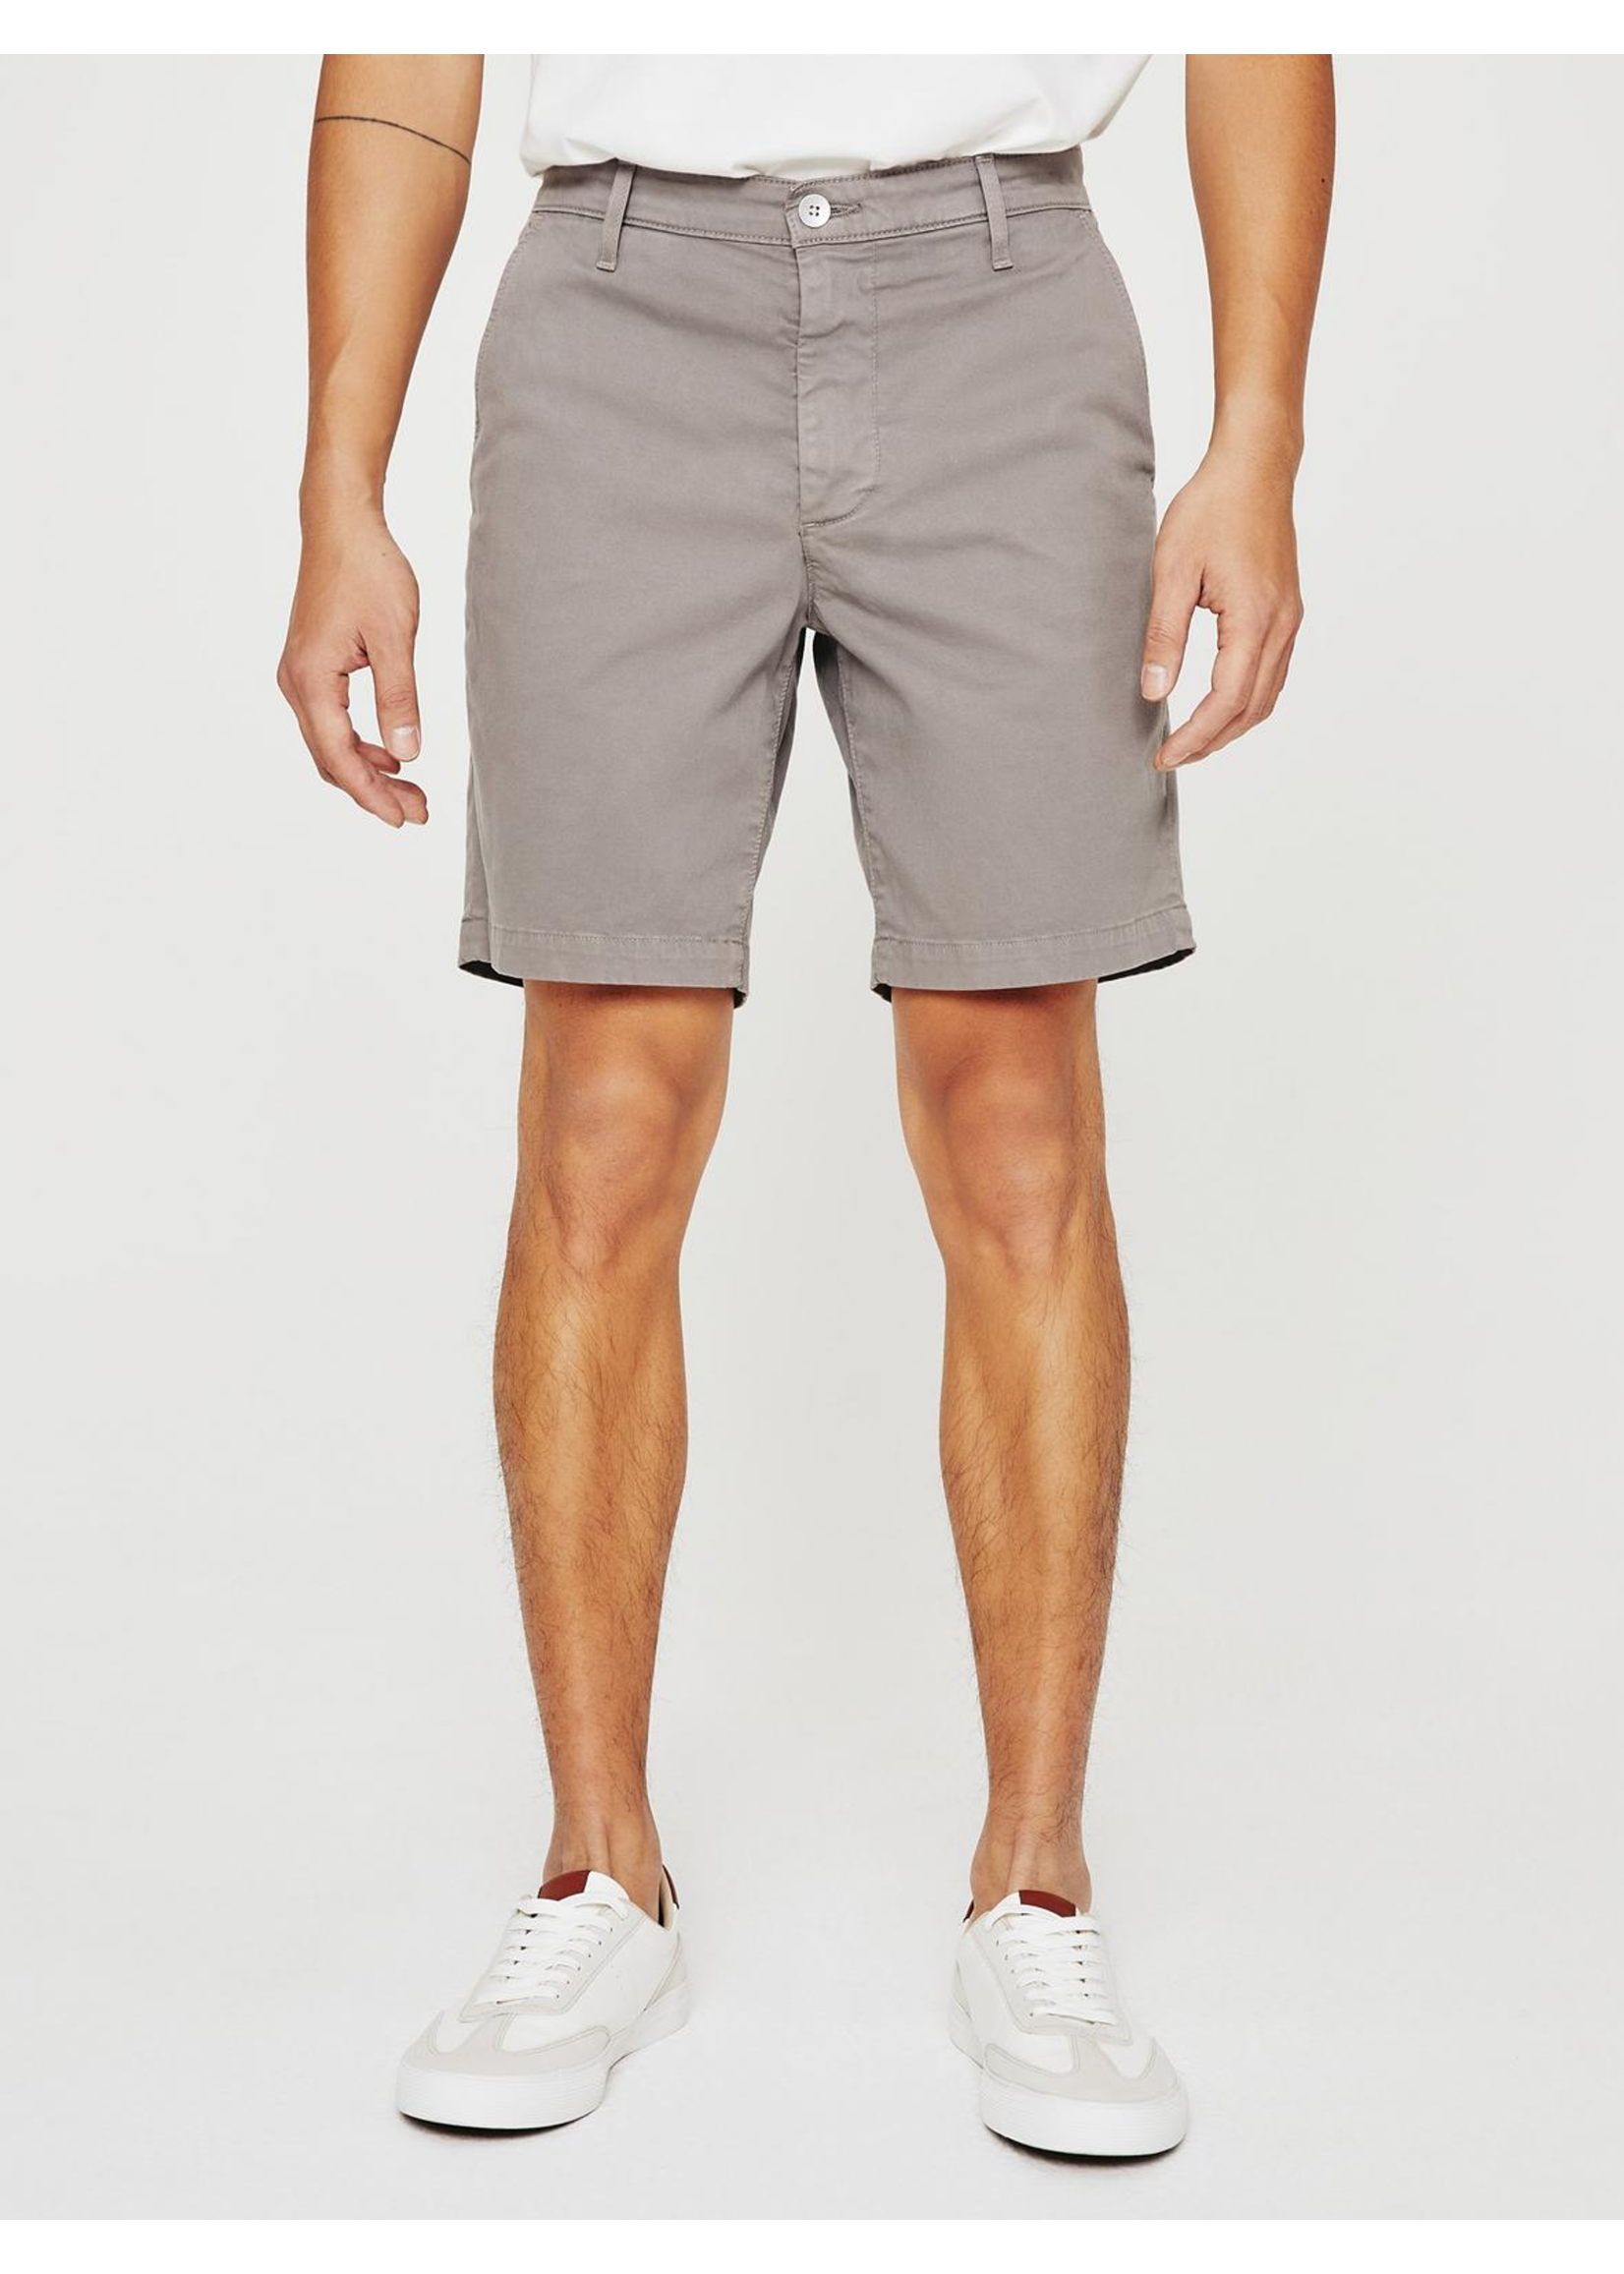 AG 'Wanderer' Sueded Sateen 8.5" Shorts 1197BRS